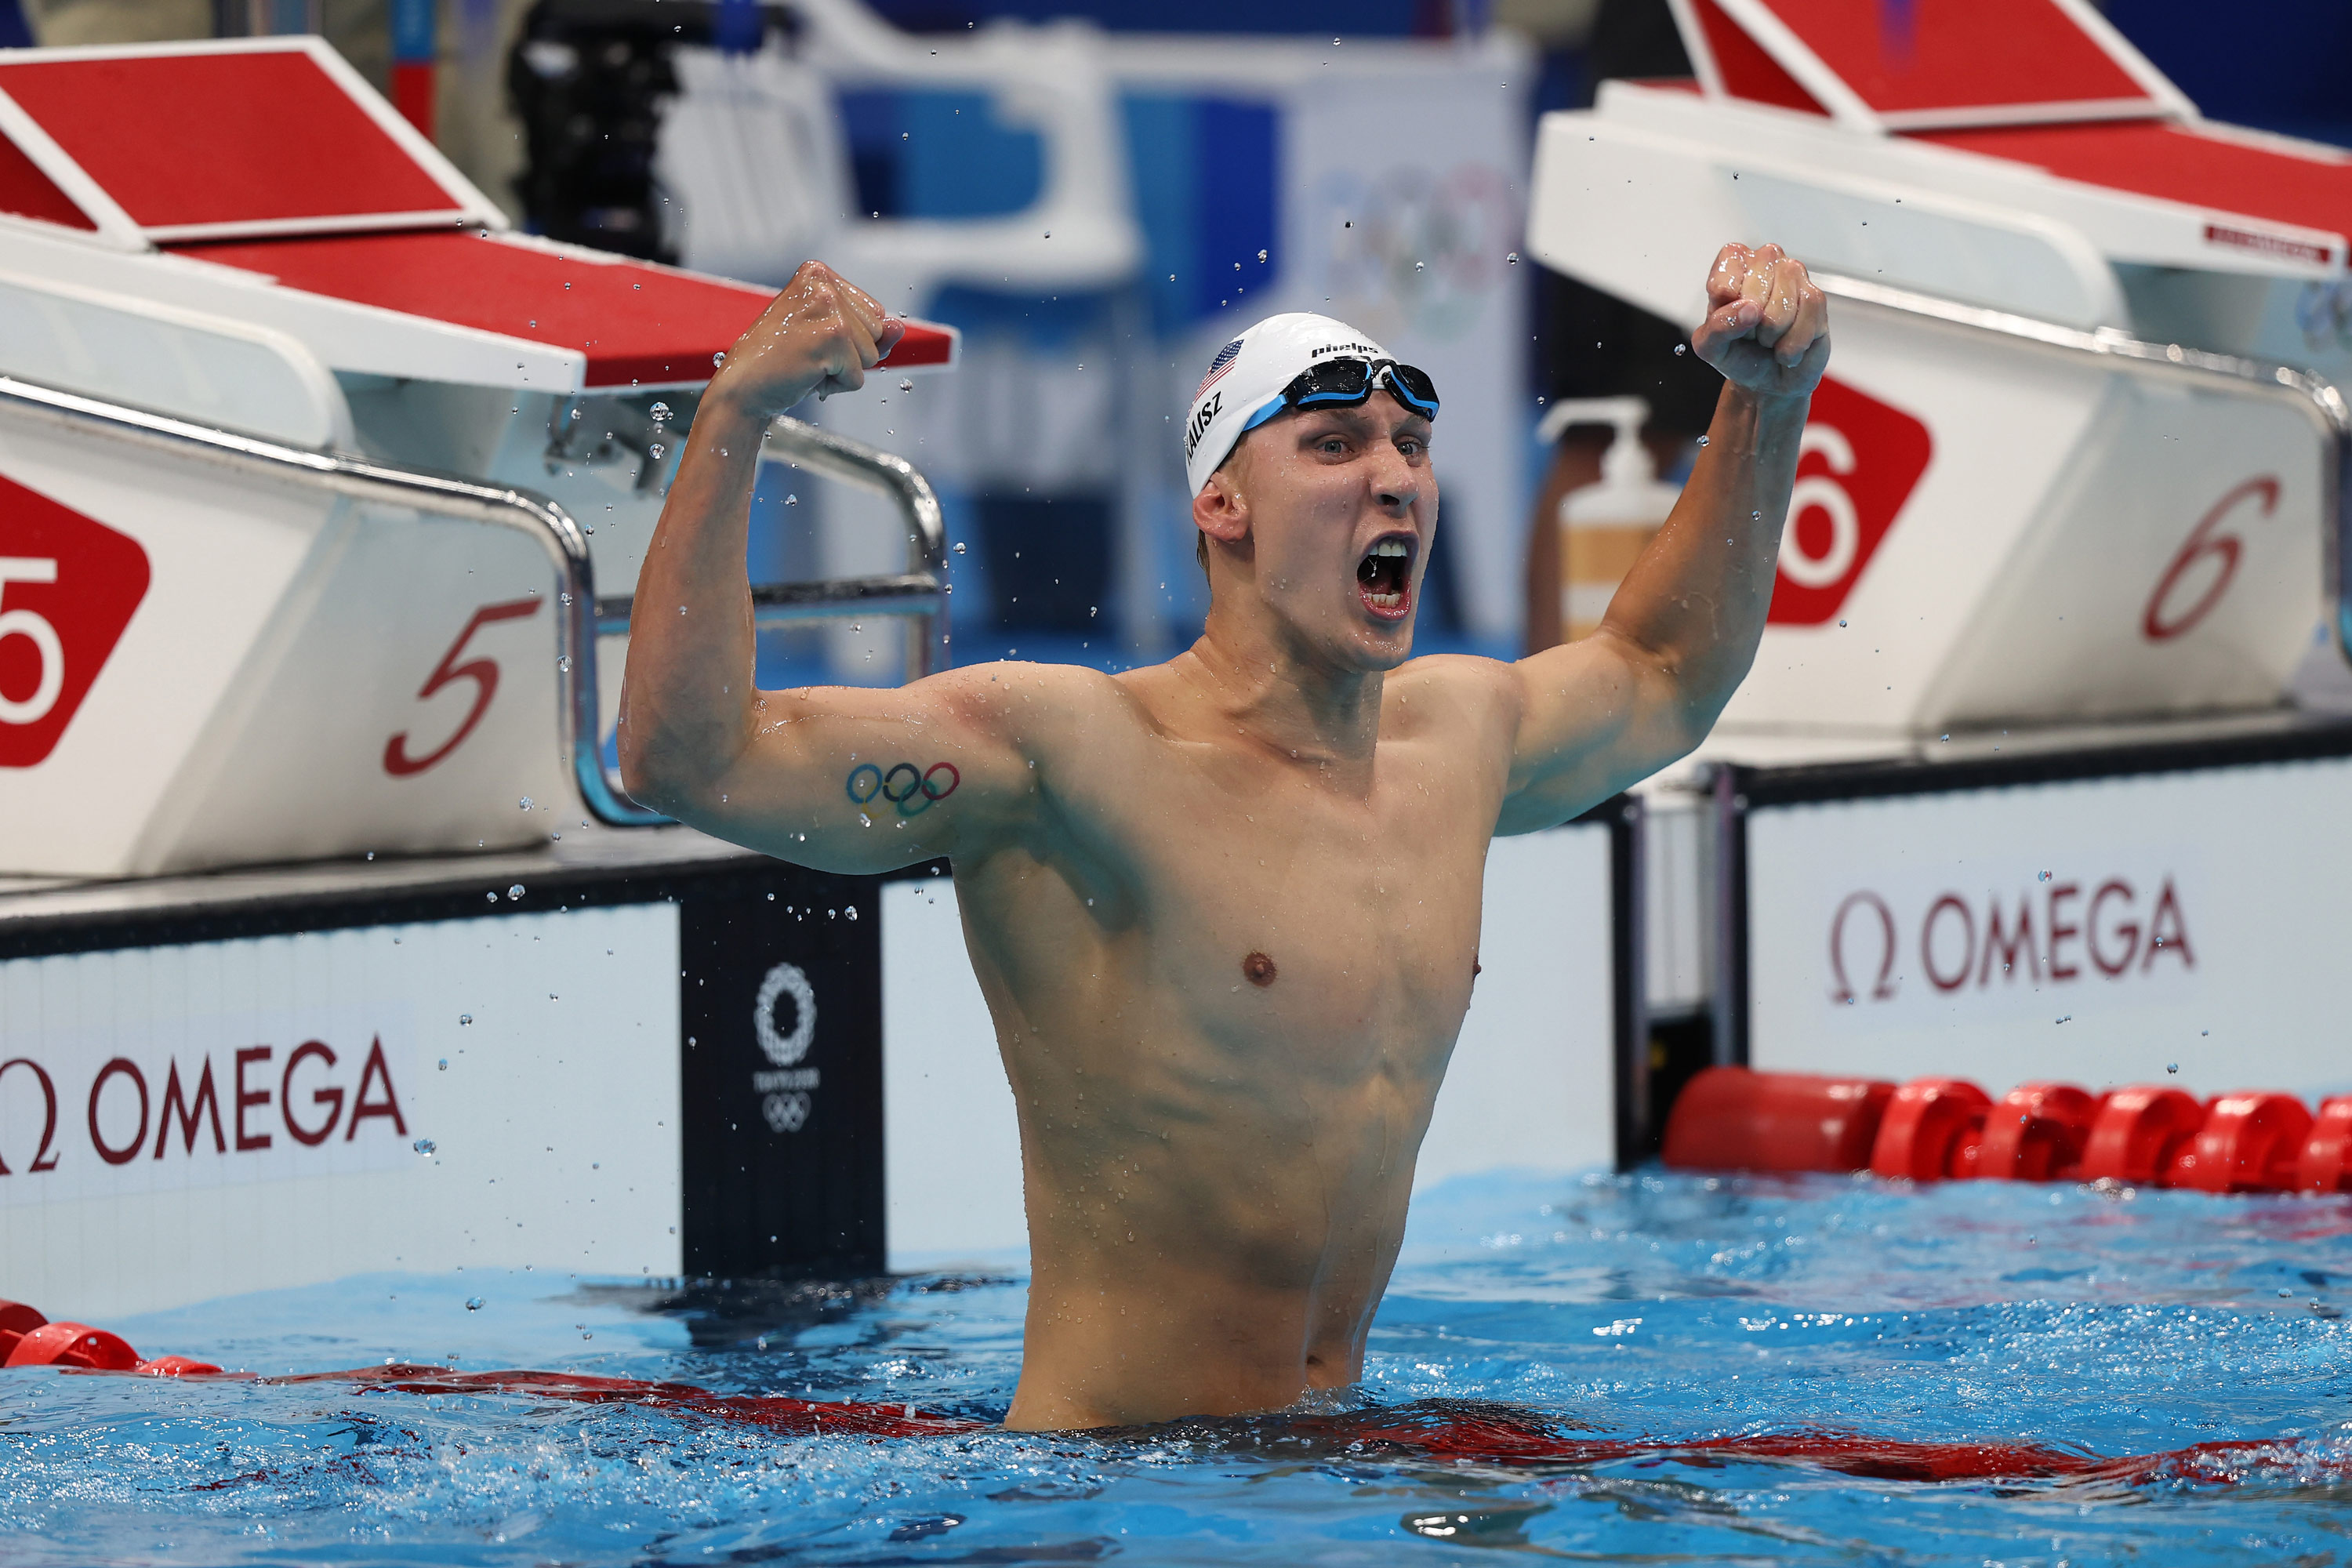 USA wins first Tokyo Olympics medals with gold,silver finish in men’s 400-meter individual medley